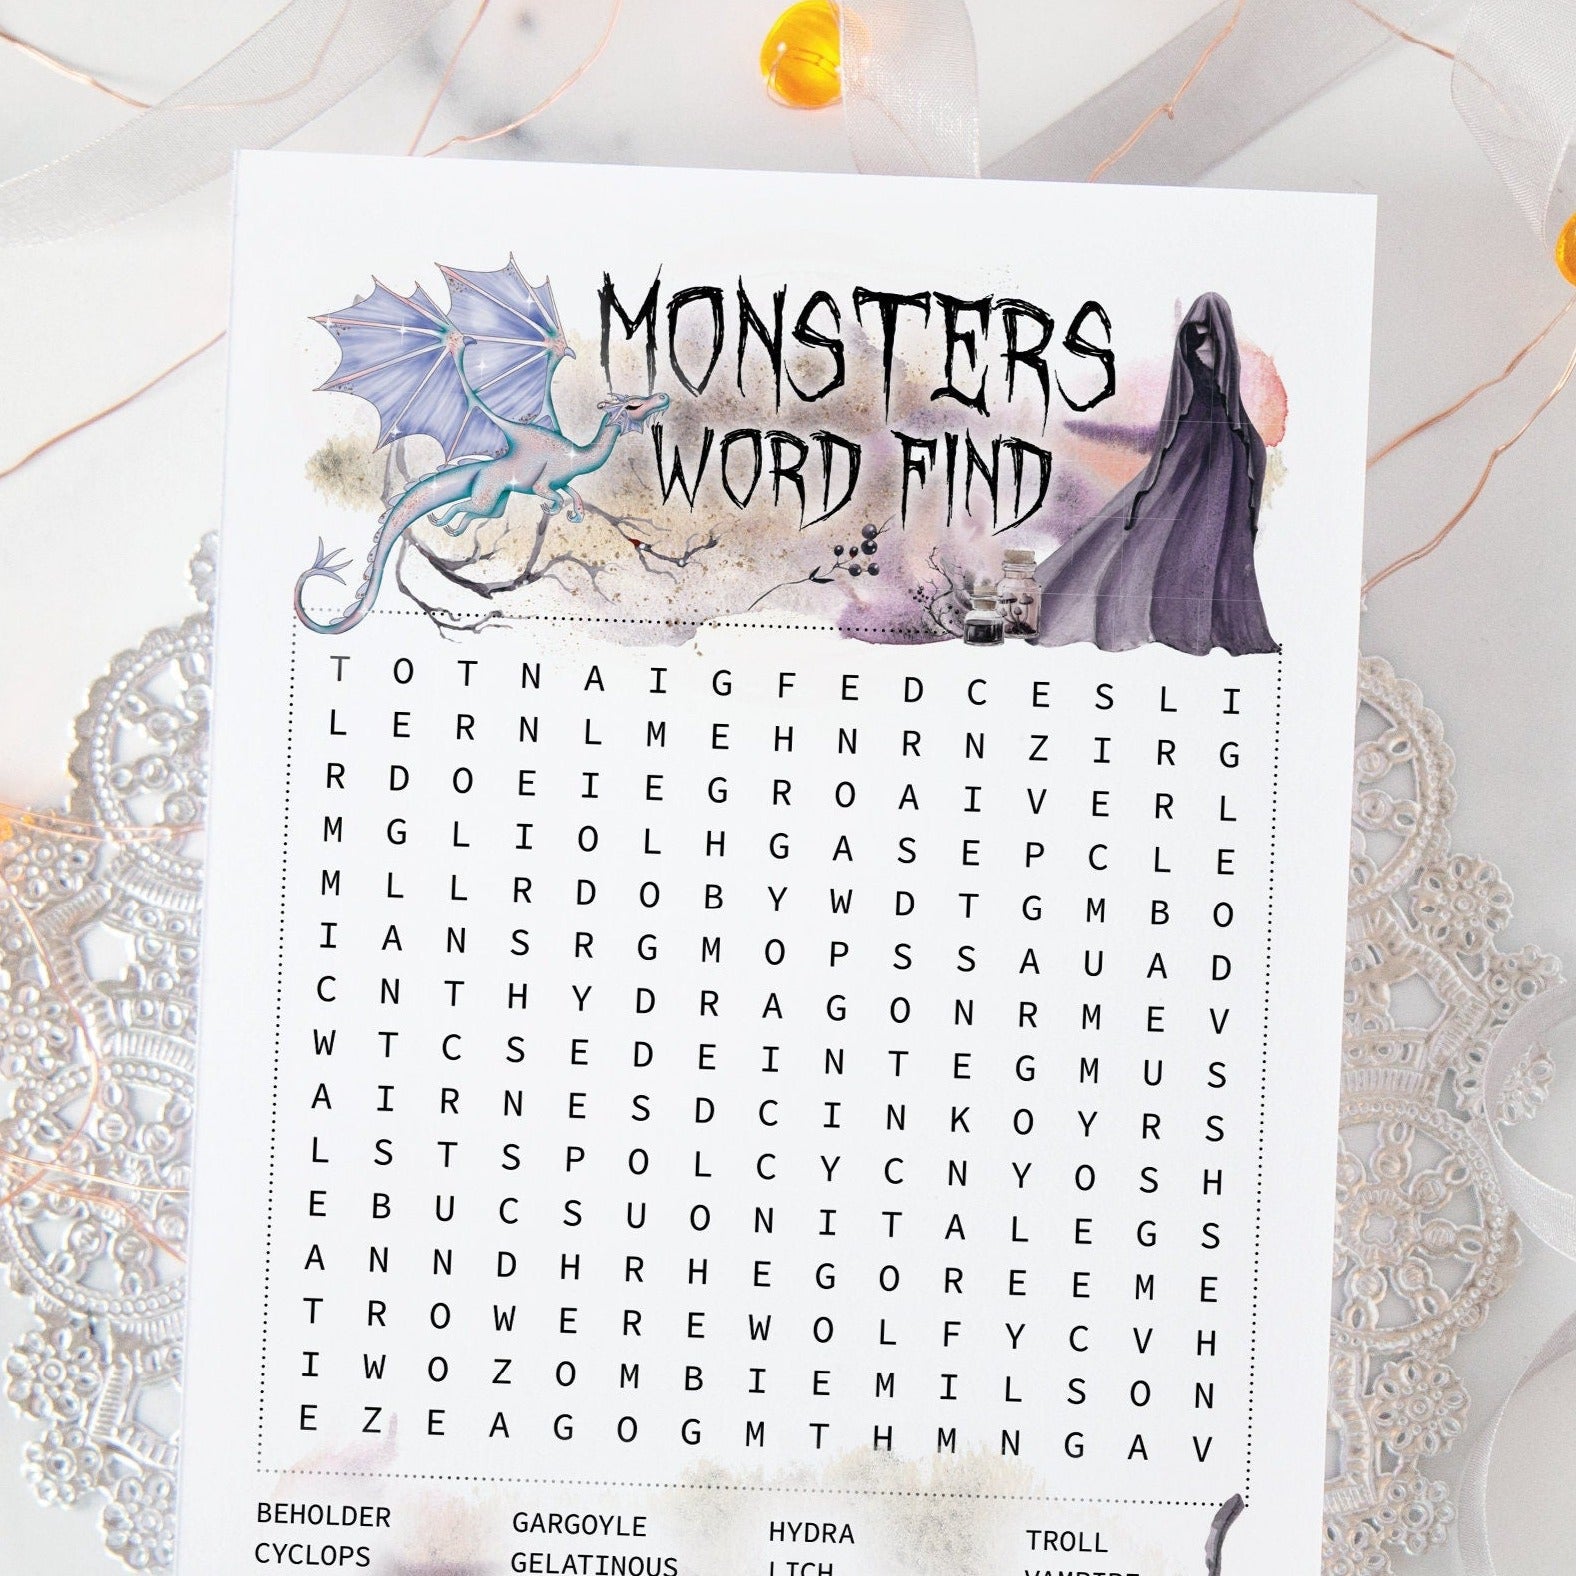 Monsters Word Find - PRINTABLE downloadable activity. Halloween word search with mythical and fantasy monsters. Beautiful artwork aesthetic.